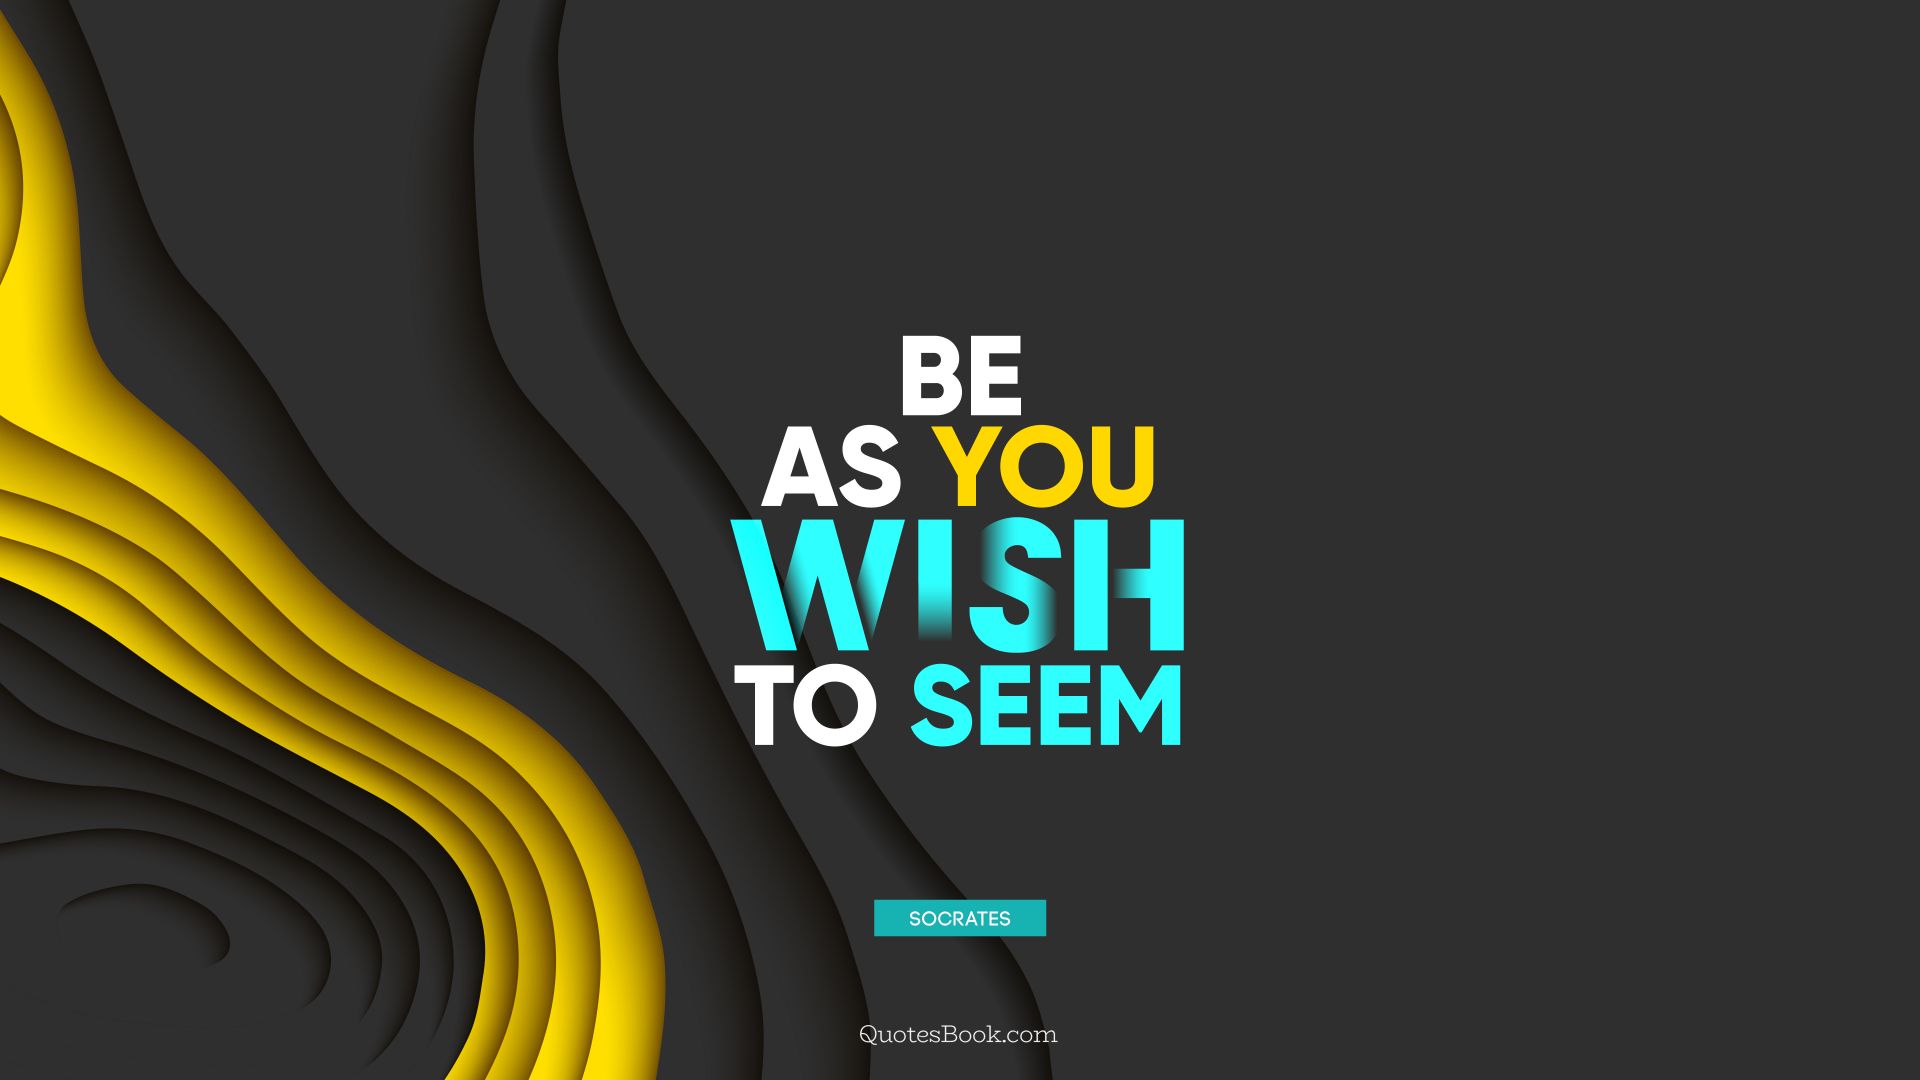 Be as you wish to seem. - Quote by Socrates